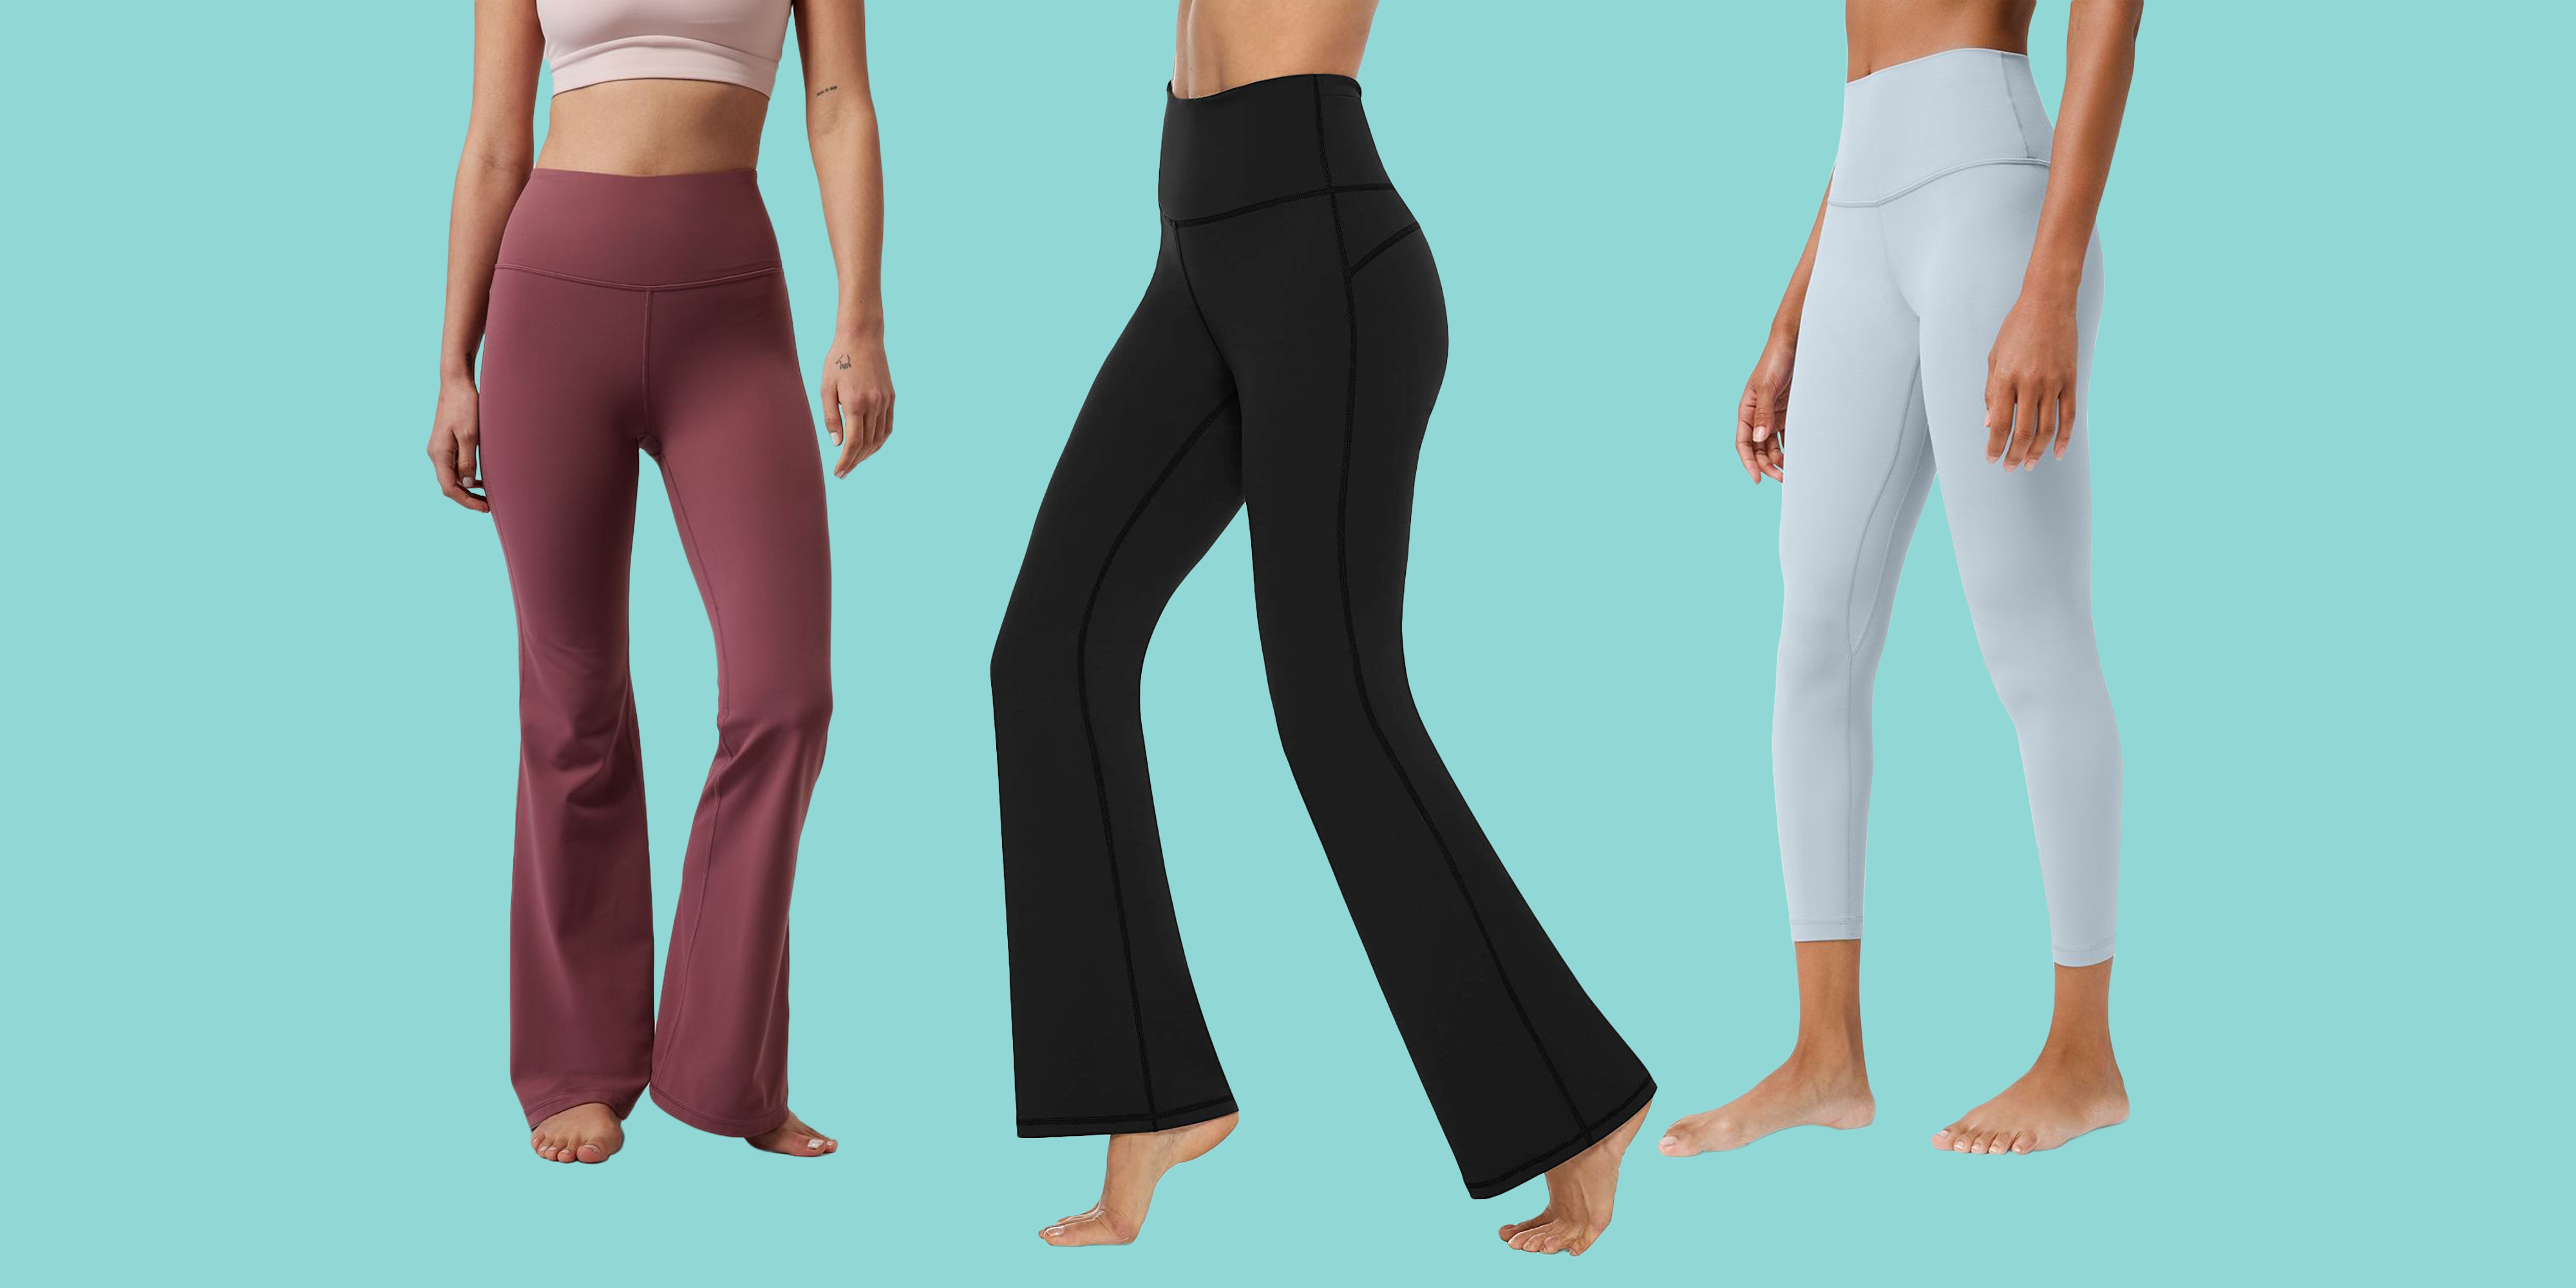 15 Best Yoga Pants in 2022 According to Yoga Instructors  Glamour